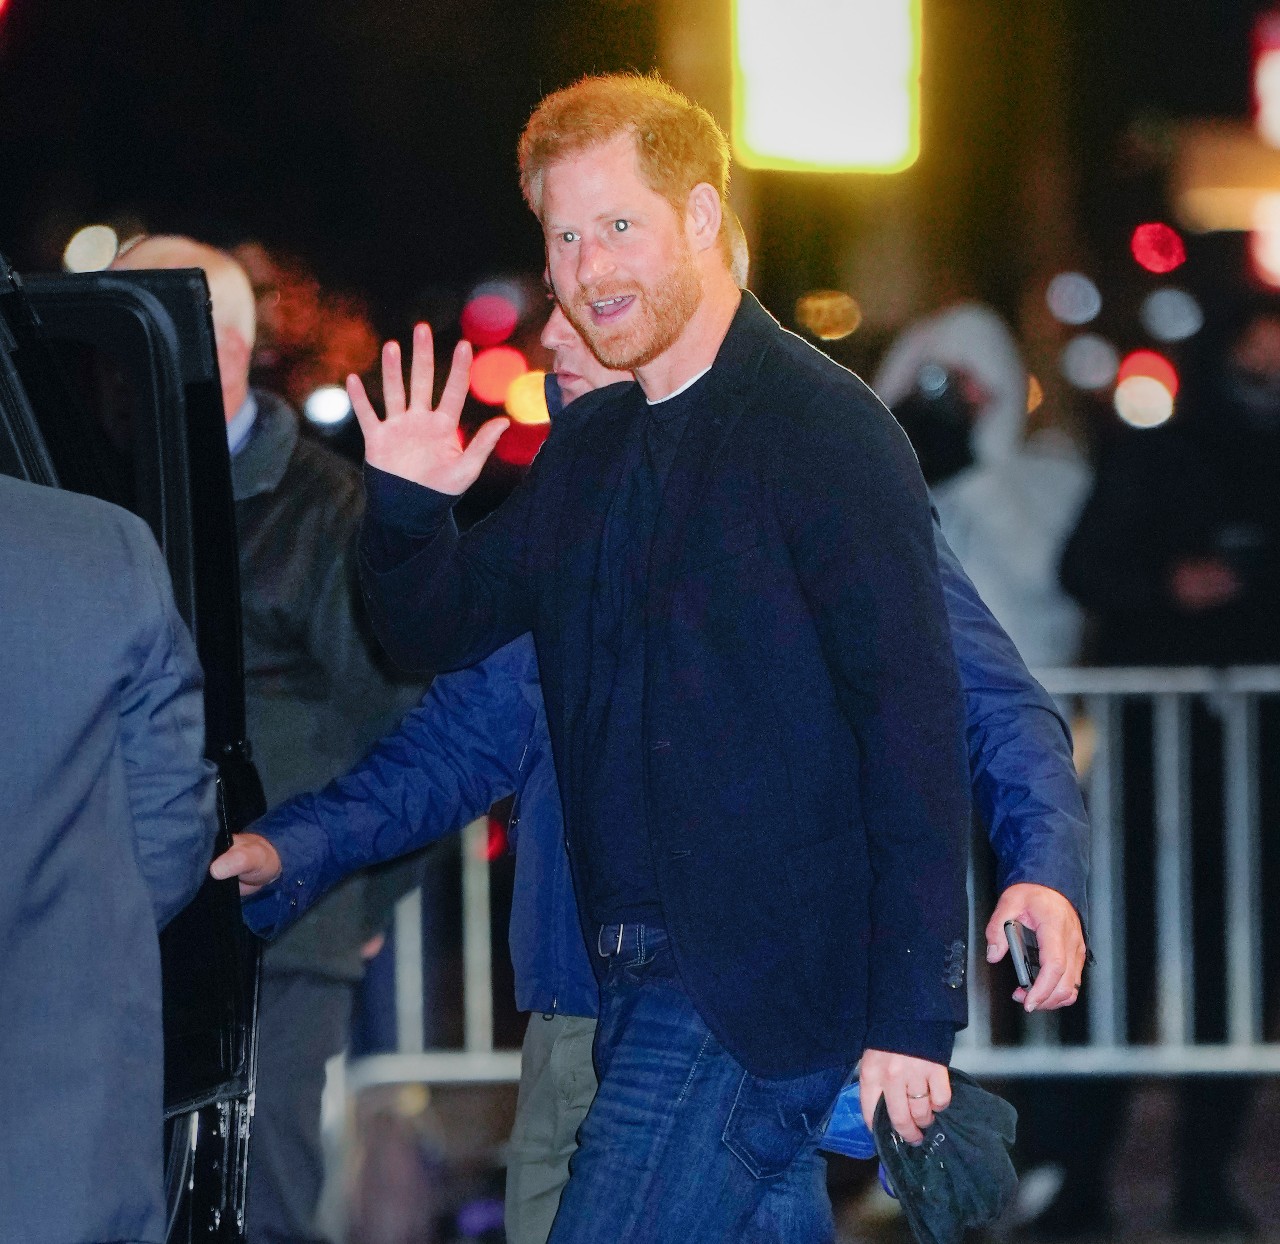 Prince Harry waves after the Stephen Colbert show.